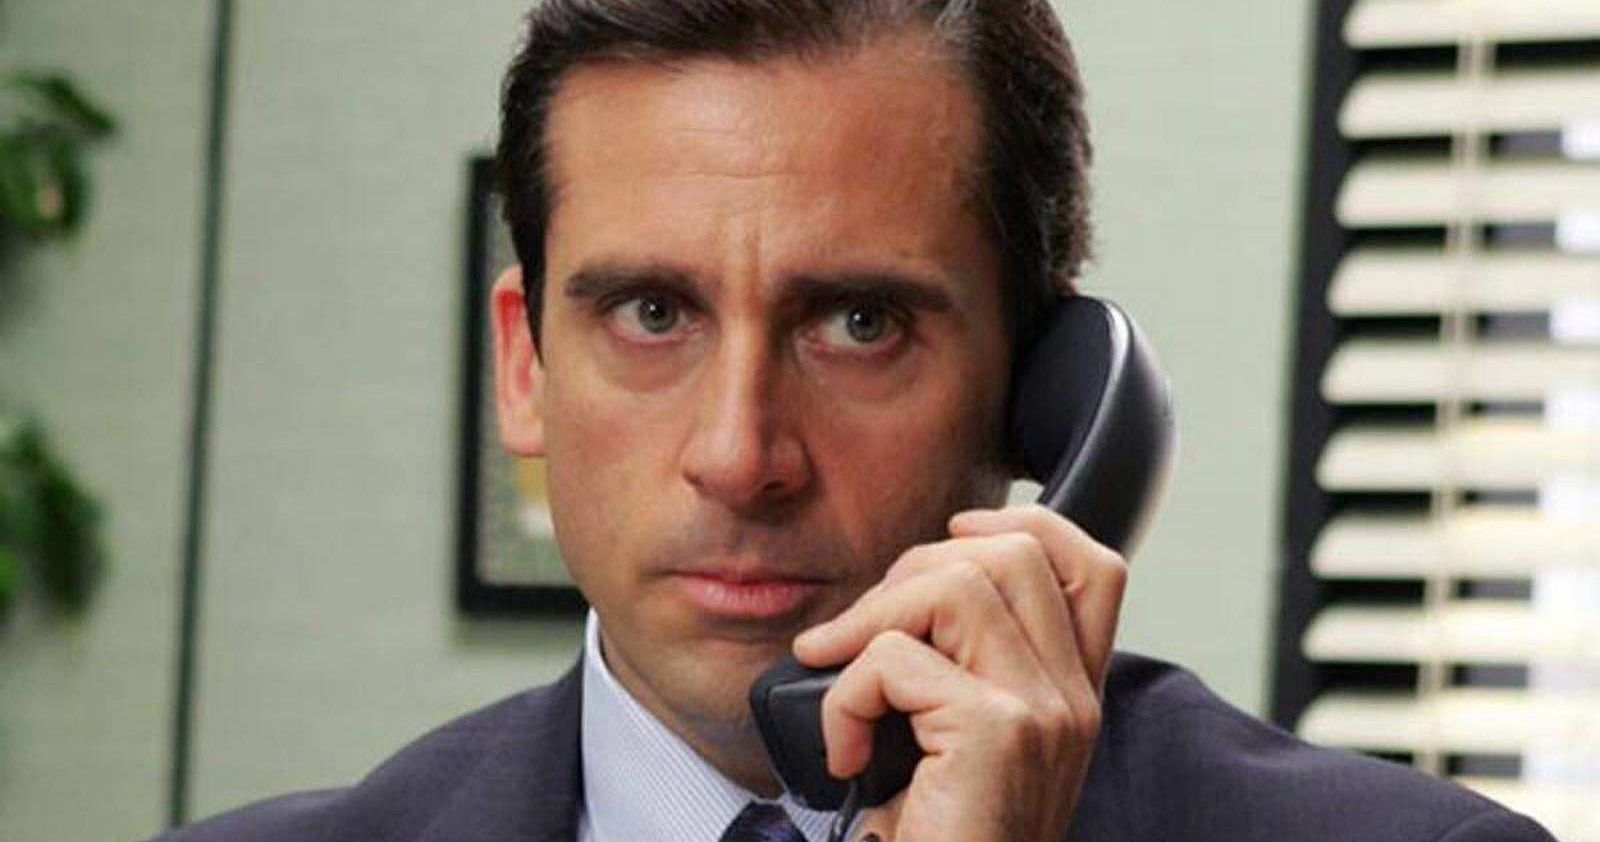 The Office Peacock Streaming Plans Revealed, Only First 2 Seasons Are Free